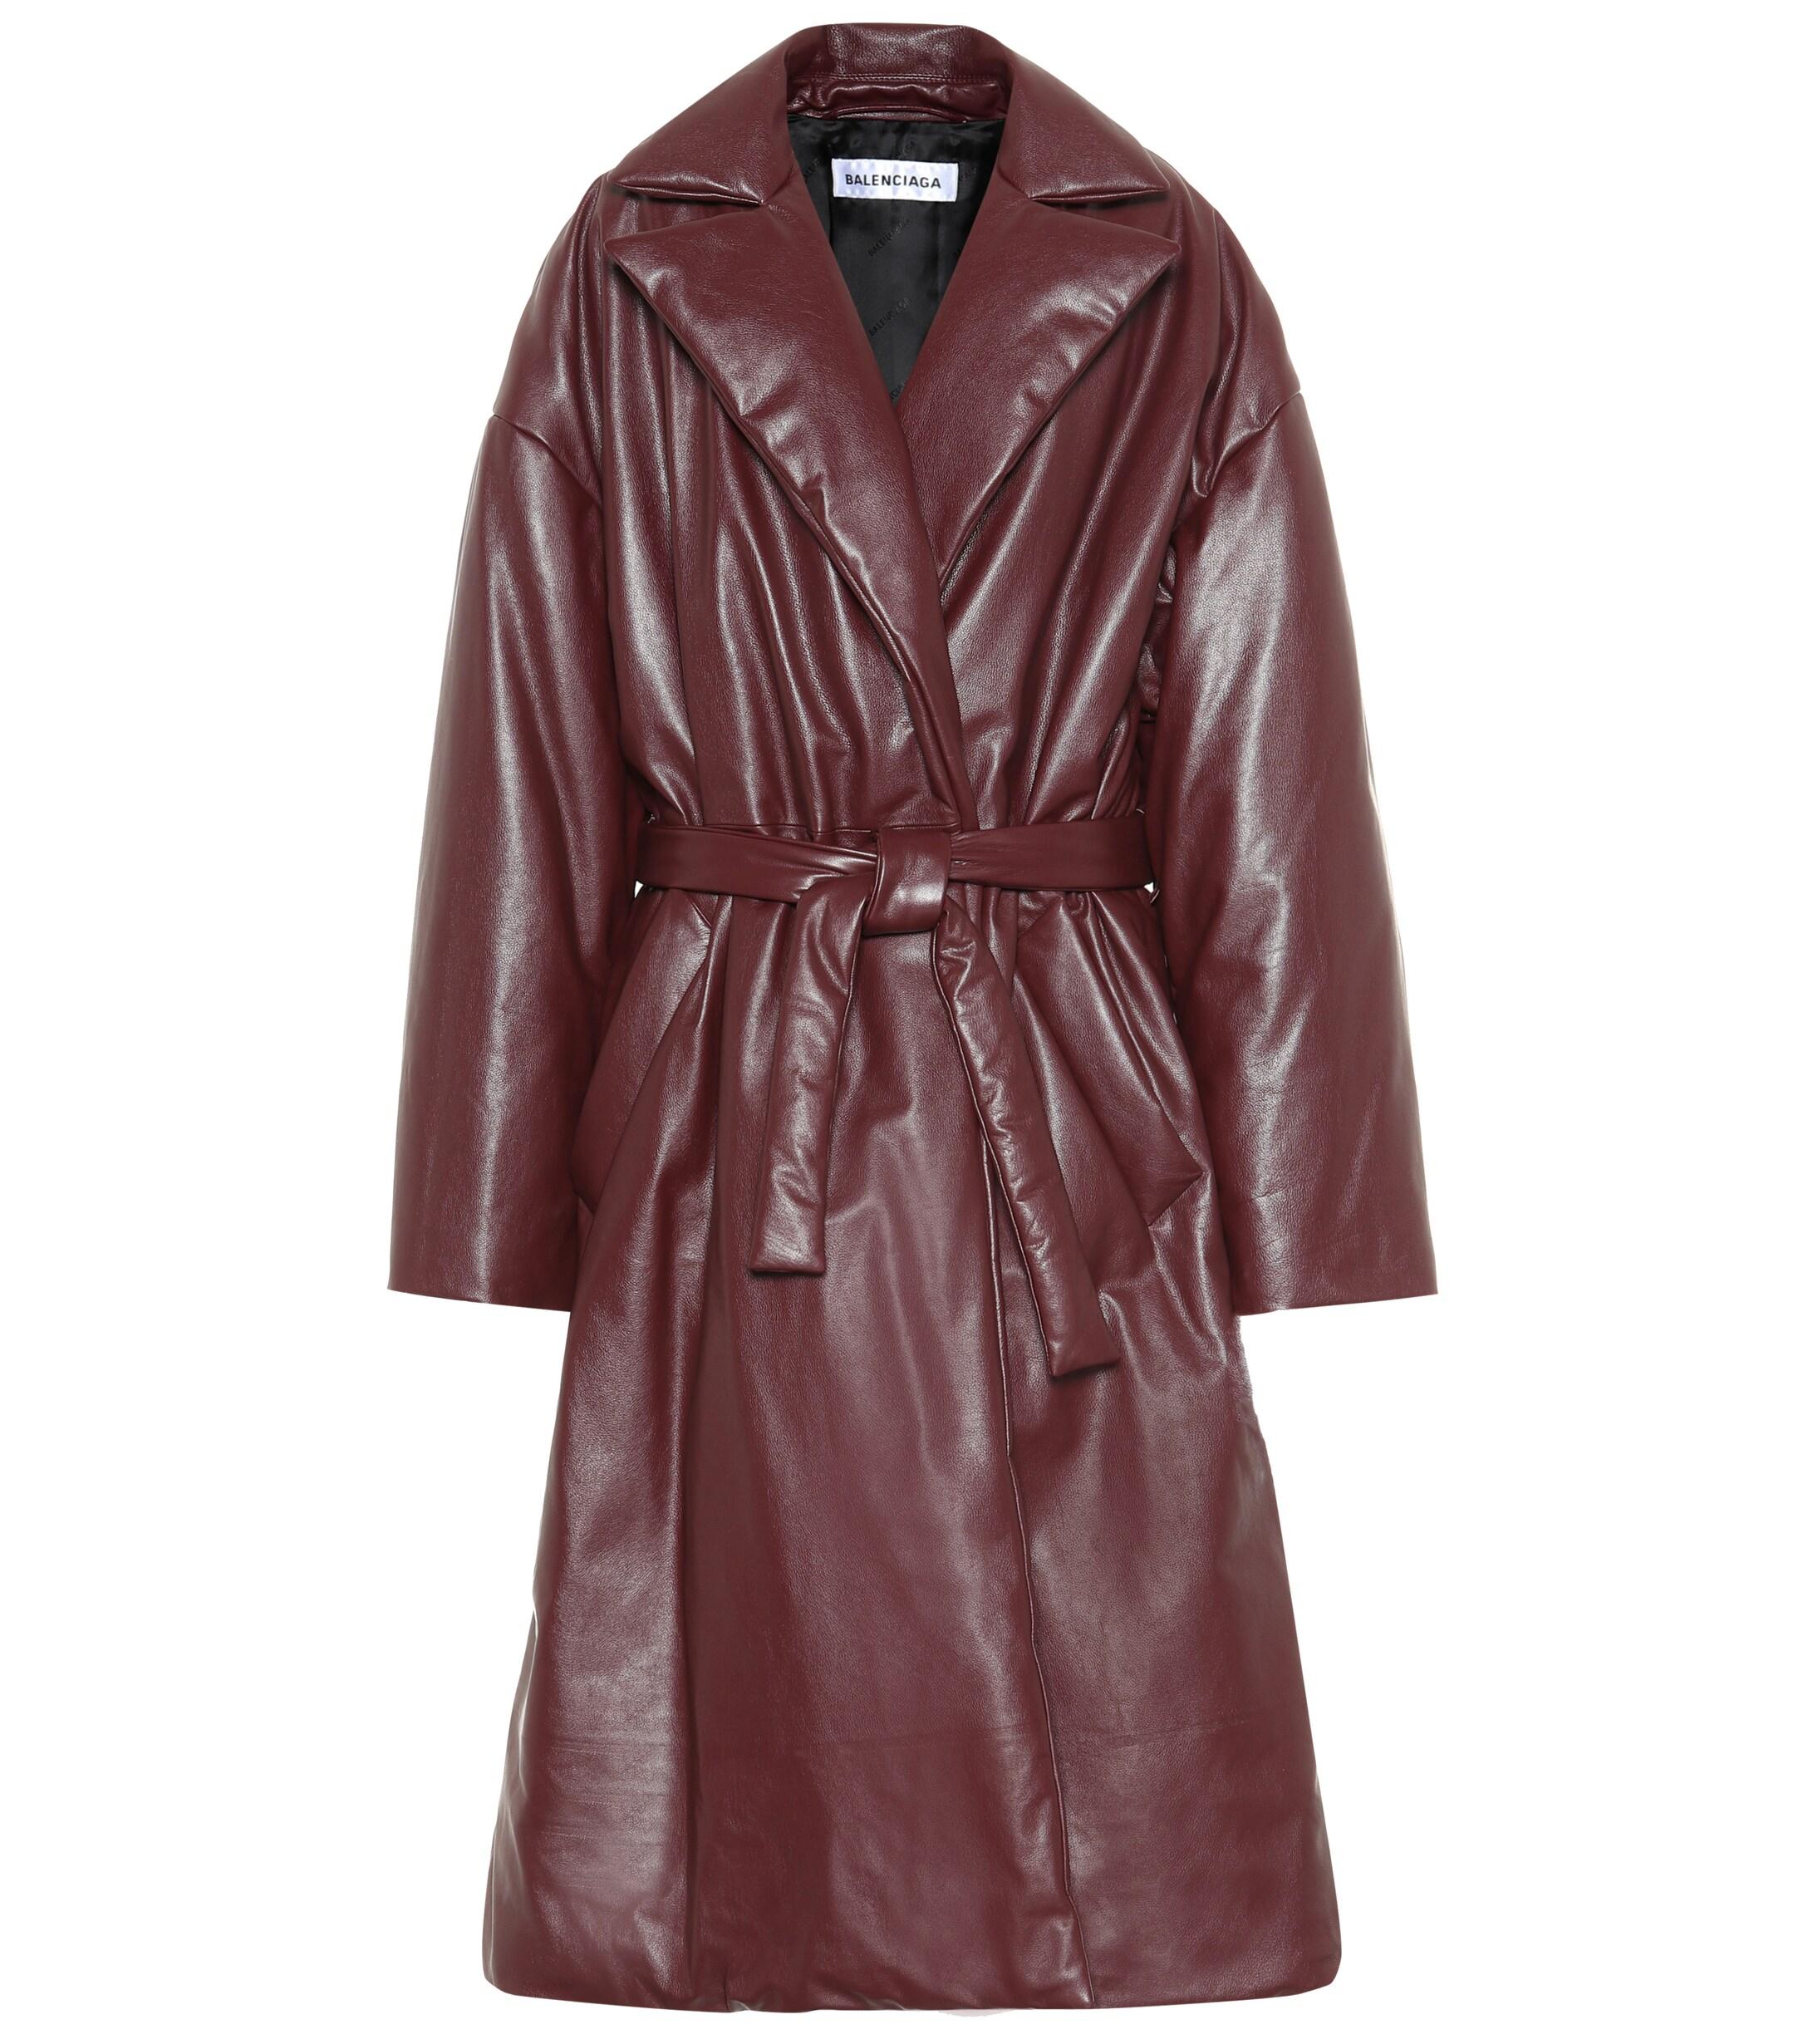 Balenciaga Padded Leather Coat in Brown - Lyst